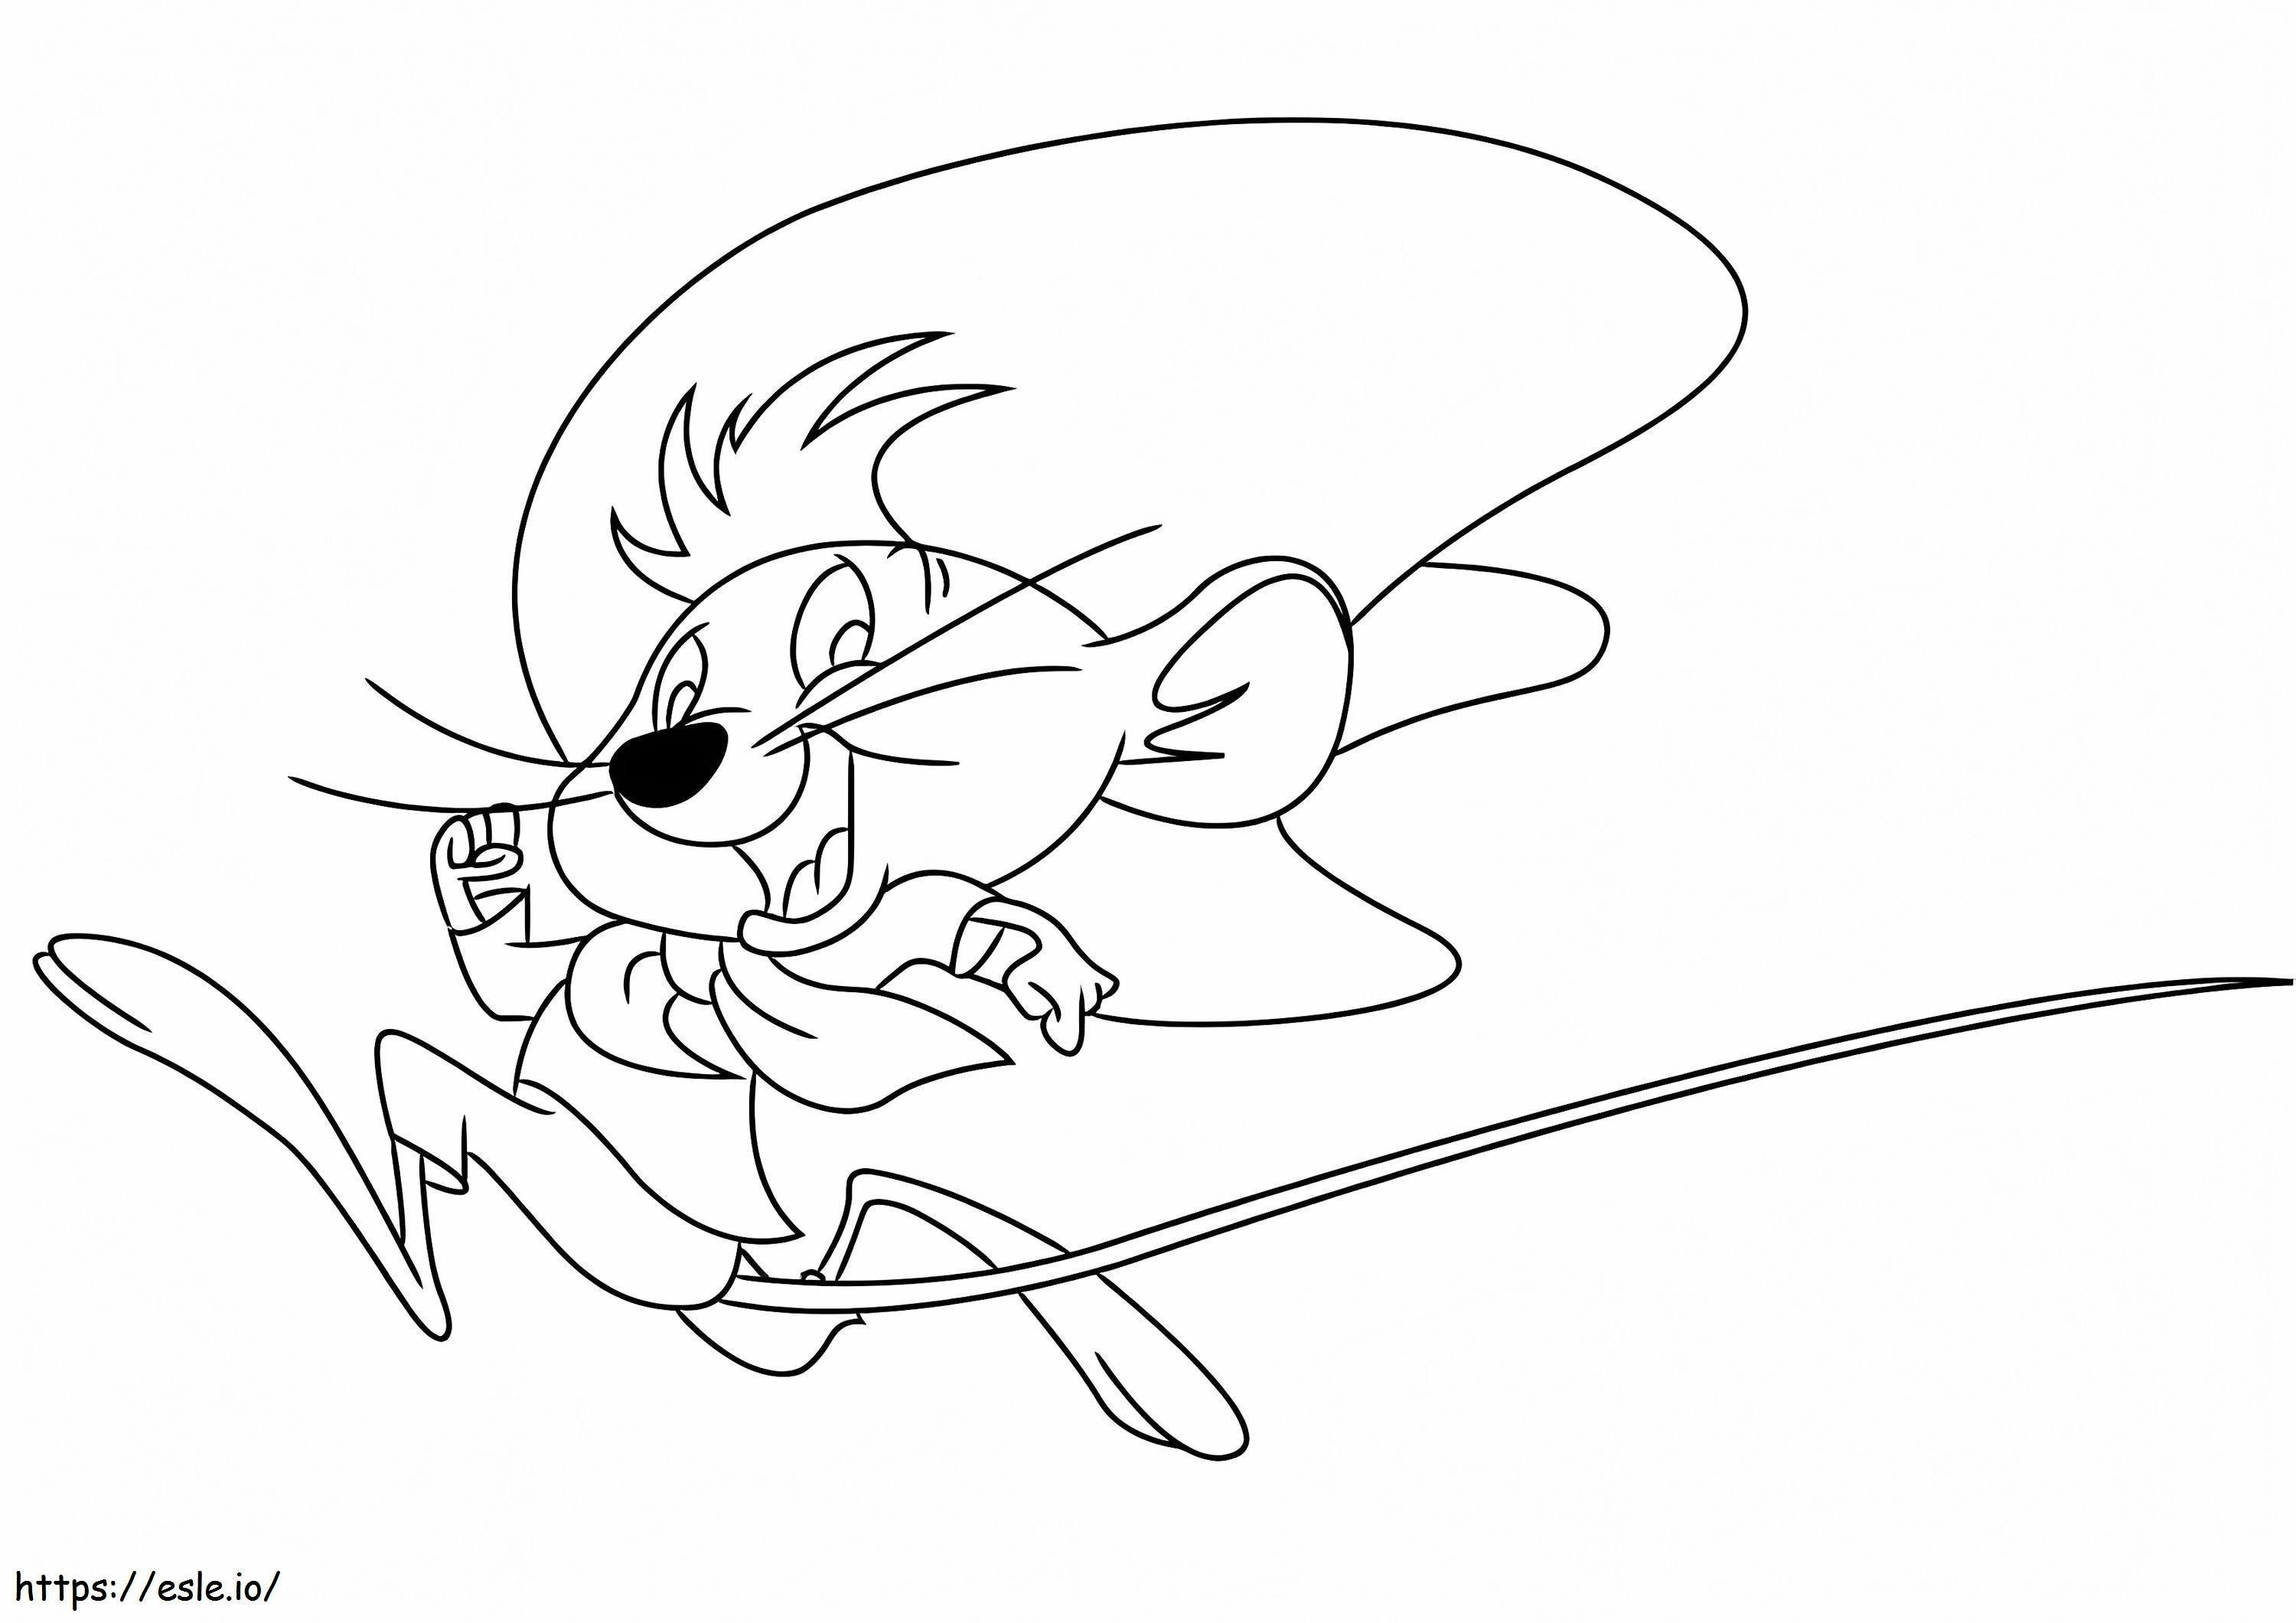 Speedy Gonzales Is Running coloring page